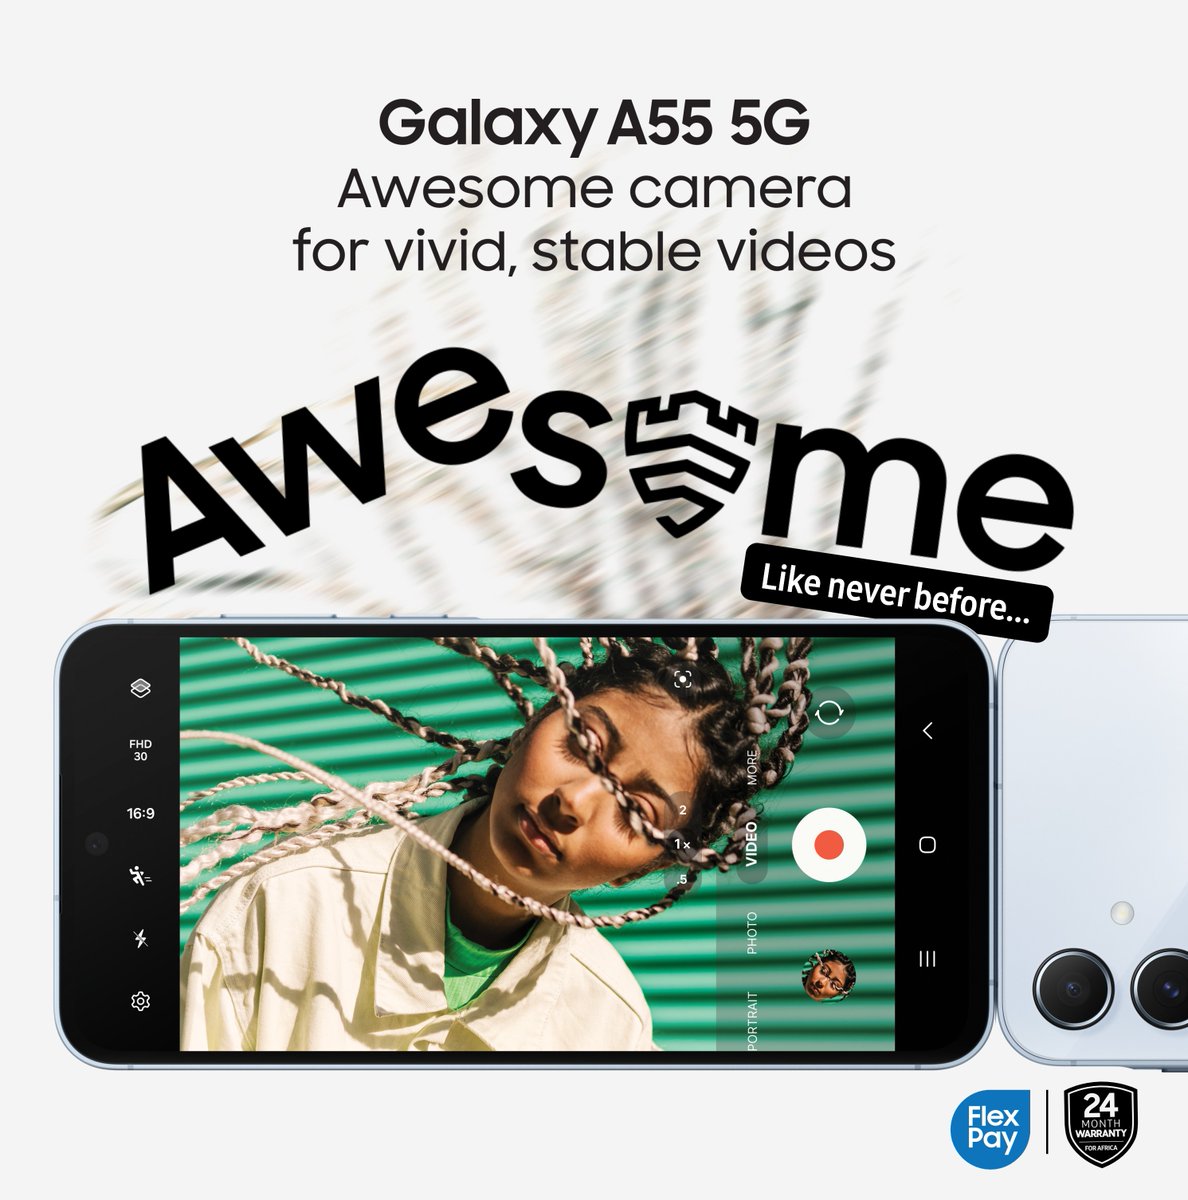 With a powerful 50MP main camera and a stunning 32MP selfie camera, the #GalaxyaA55 5G gives you a Super HDR and Optical Image Stabilization experience with every shot.

Now vailable at a Samsung authorized store near you.

#AwesomeLikeNeverBefore
#SamsungNigeria